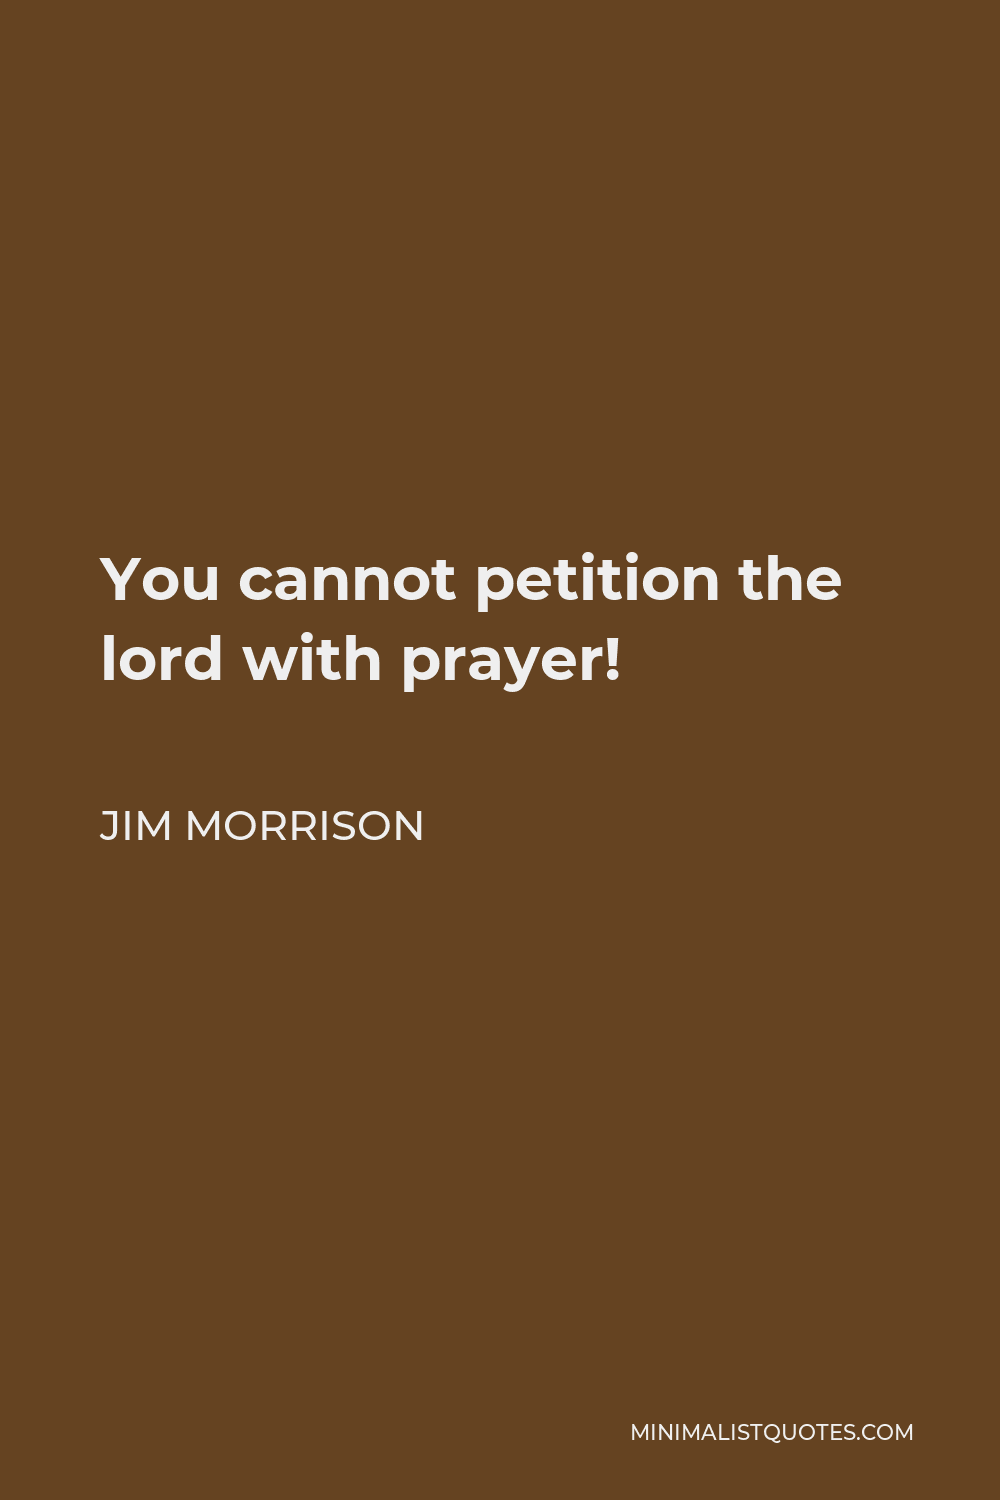 Jim Morrison Quote - You cannot petition the lord with prayer!